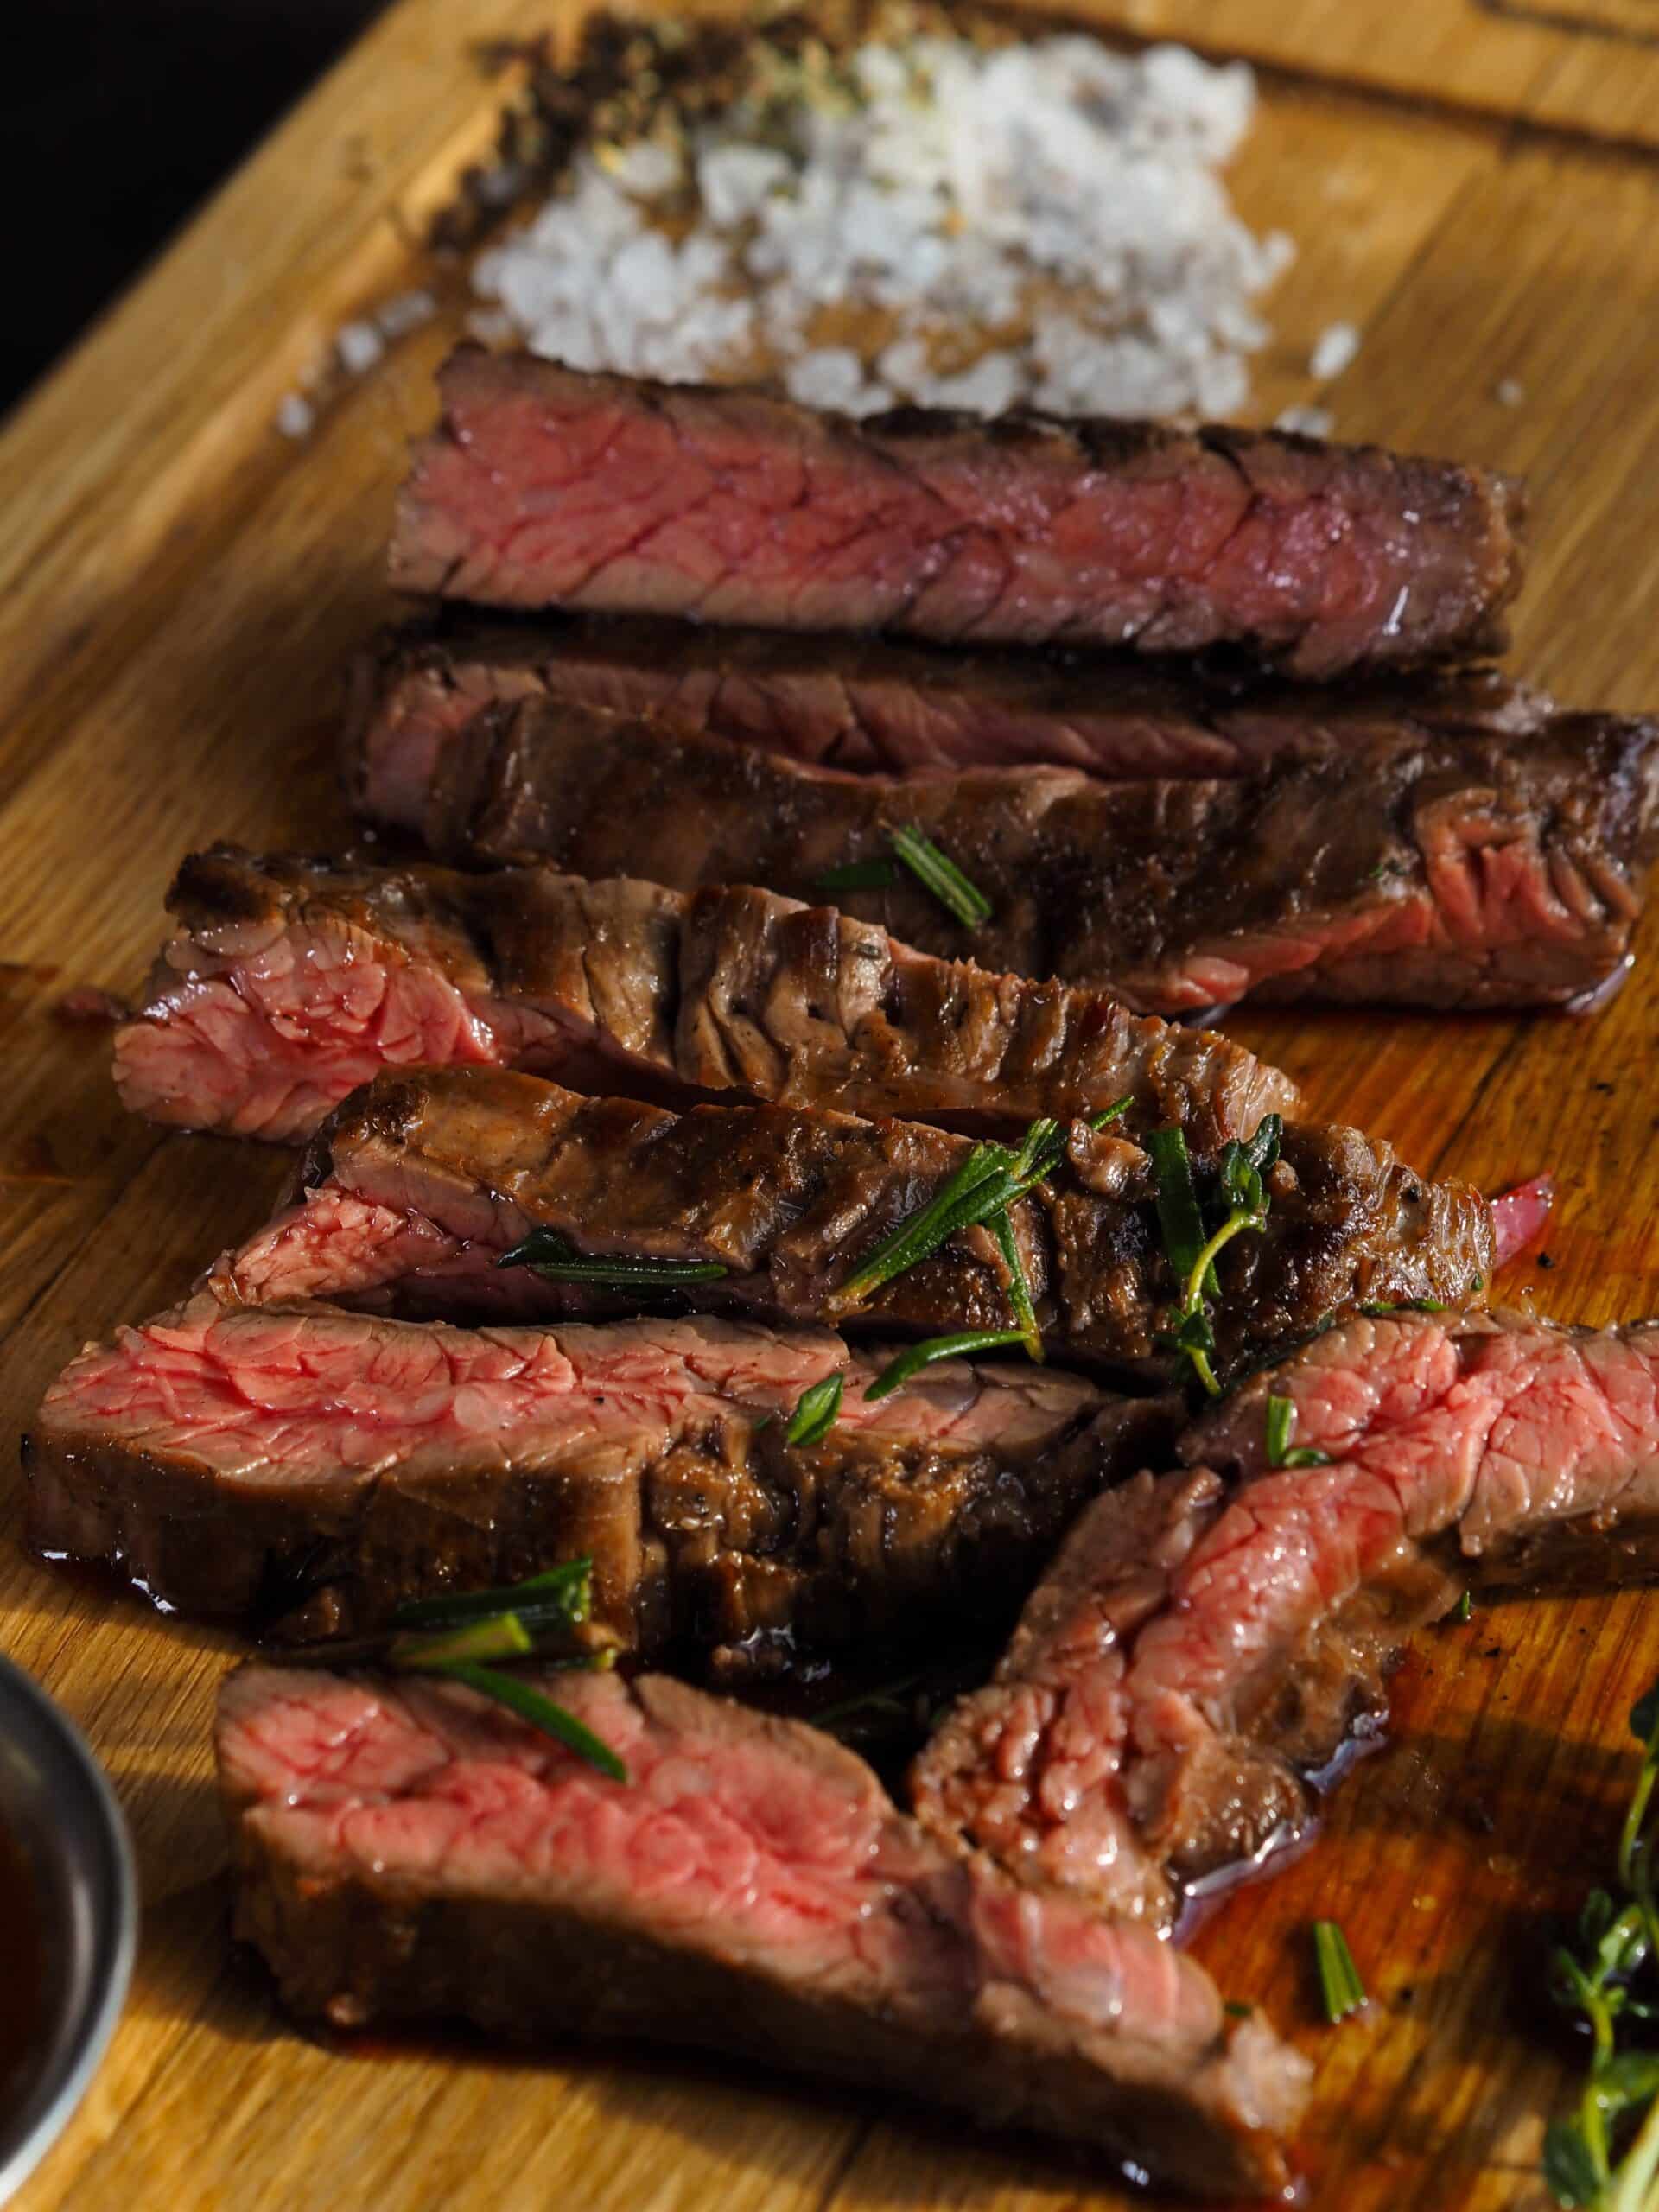 Sliced steak. Learn the 5 steps on how to get a perect crust on your steak.